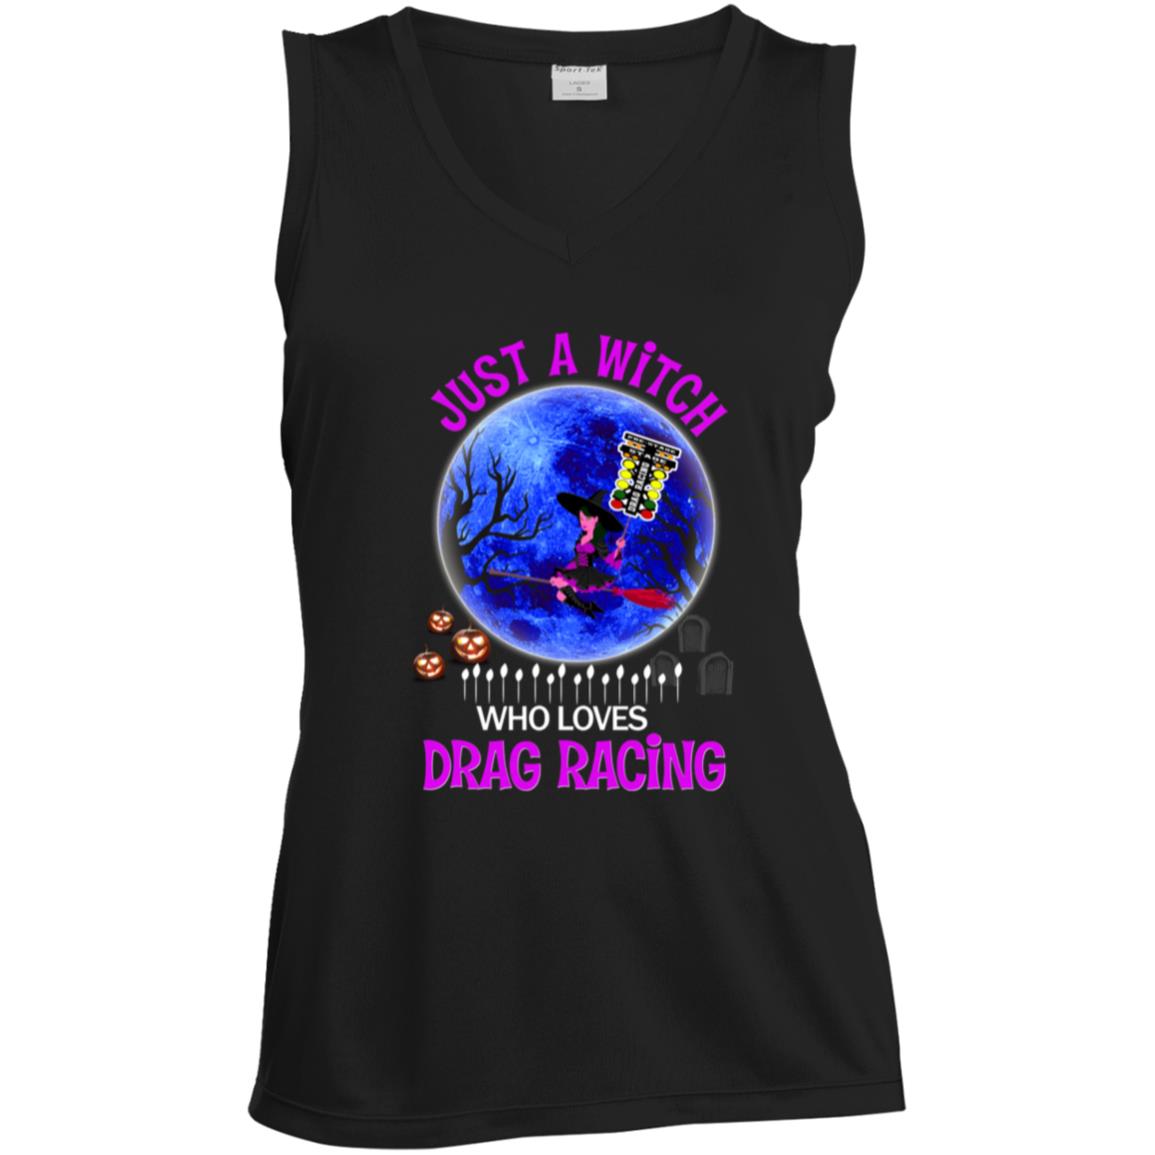 Just A Witch Who Loves Drag Racing Ladies' Sleeveless V-Neck Performance Tee